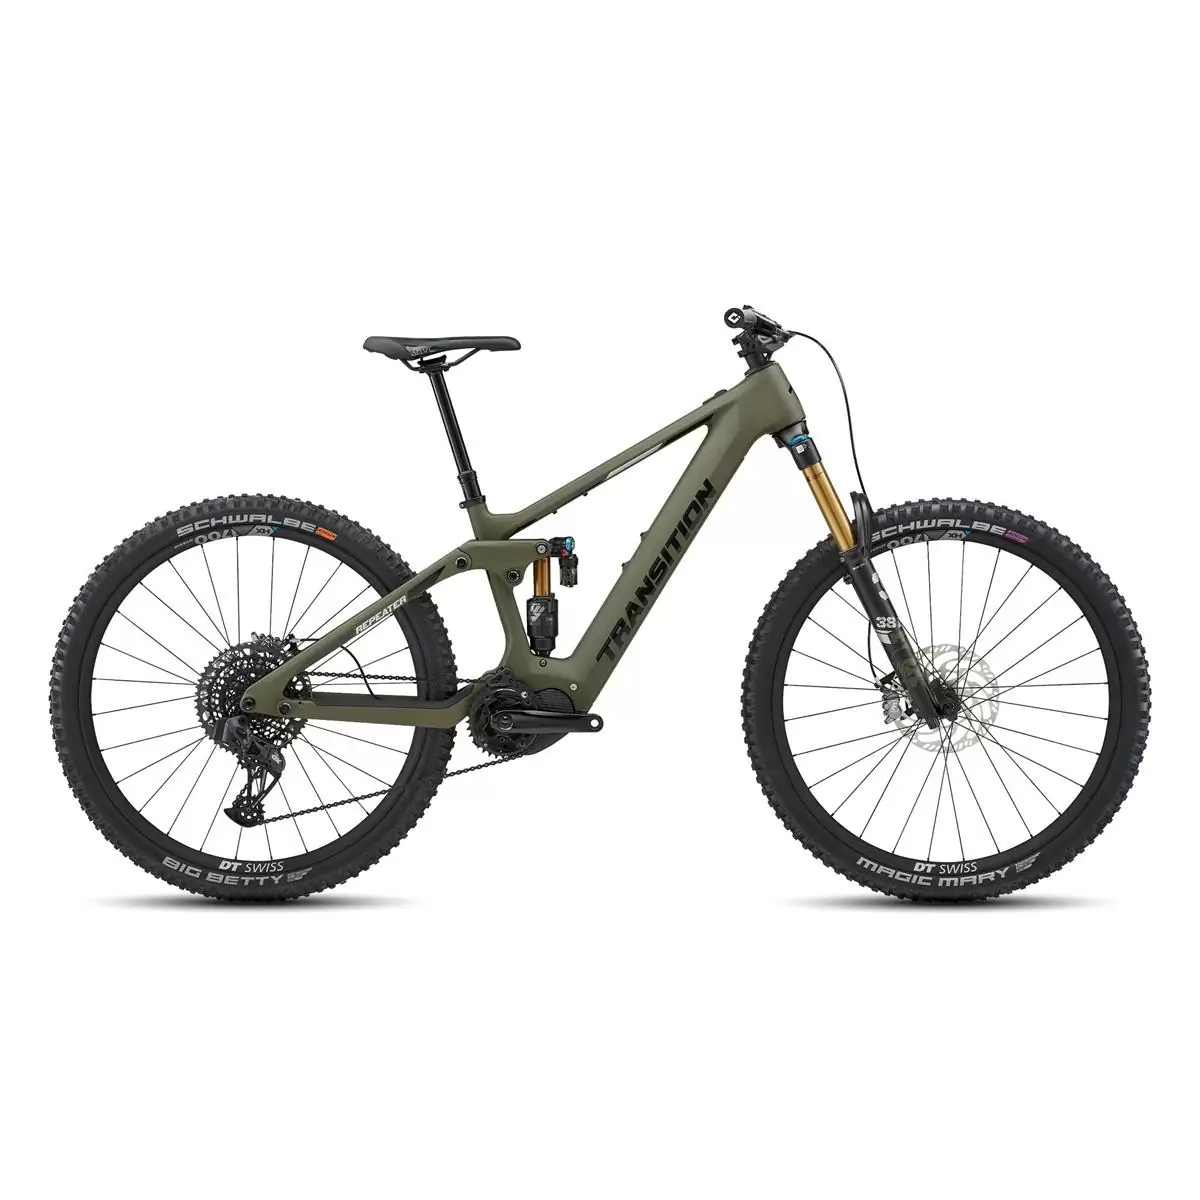 Repeater Carbon AXS 29'' 160mm 12s 630Wh Shimano EP8 Mossy Green Size S - image